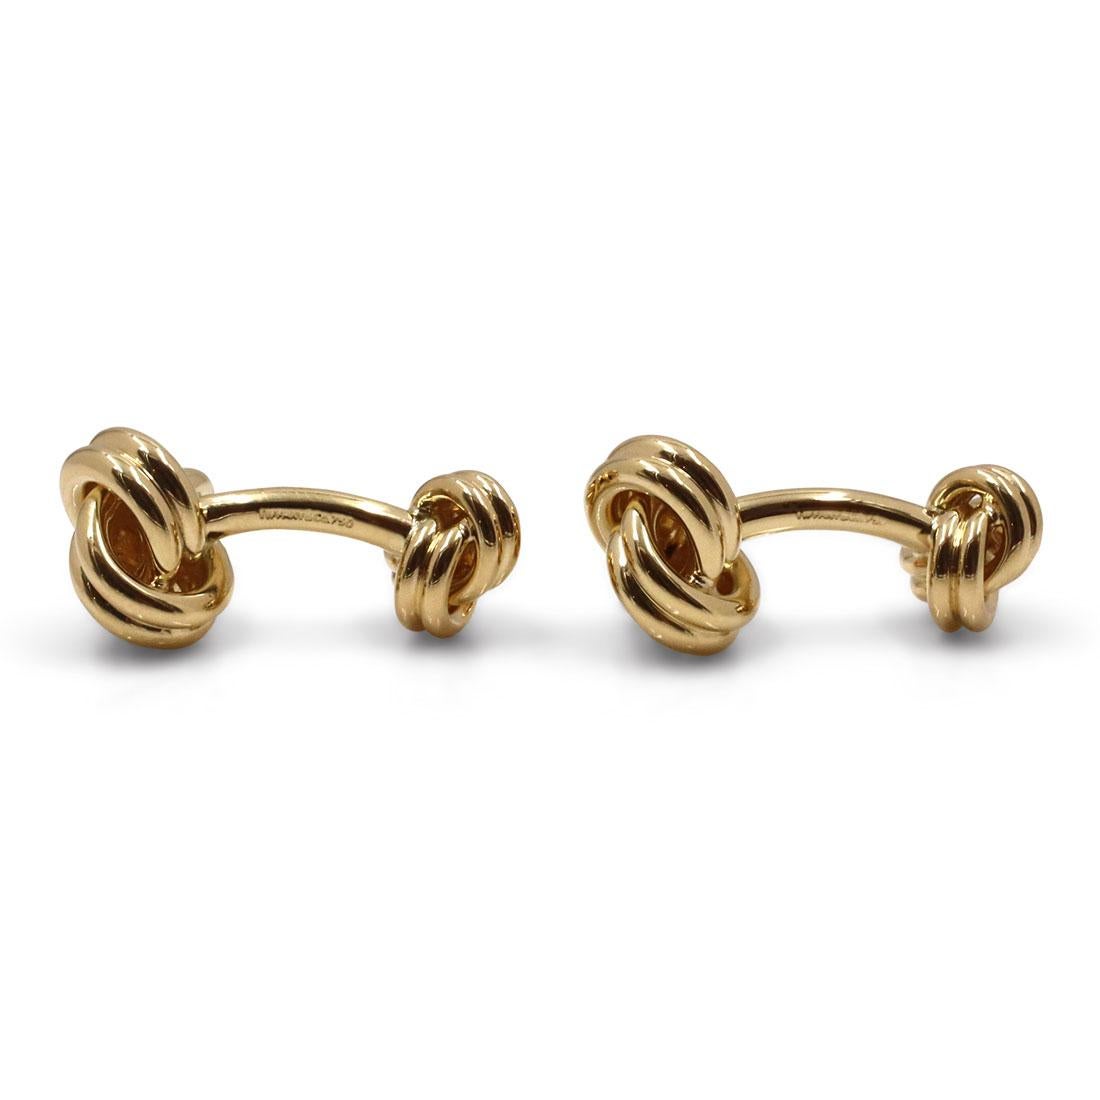 Authentic Tiffany & Co. Knot cufflinks crafted in 18 karat yellow gold. These classic cufflinks are designed in the shape of a knot on both ends. Signed Tiffany & Co., 750. The cufflinks are not presented with the box or papers. CIRCA 2010s

Brand: